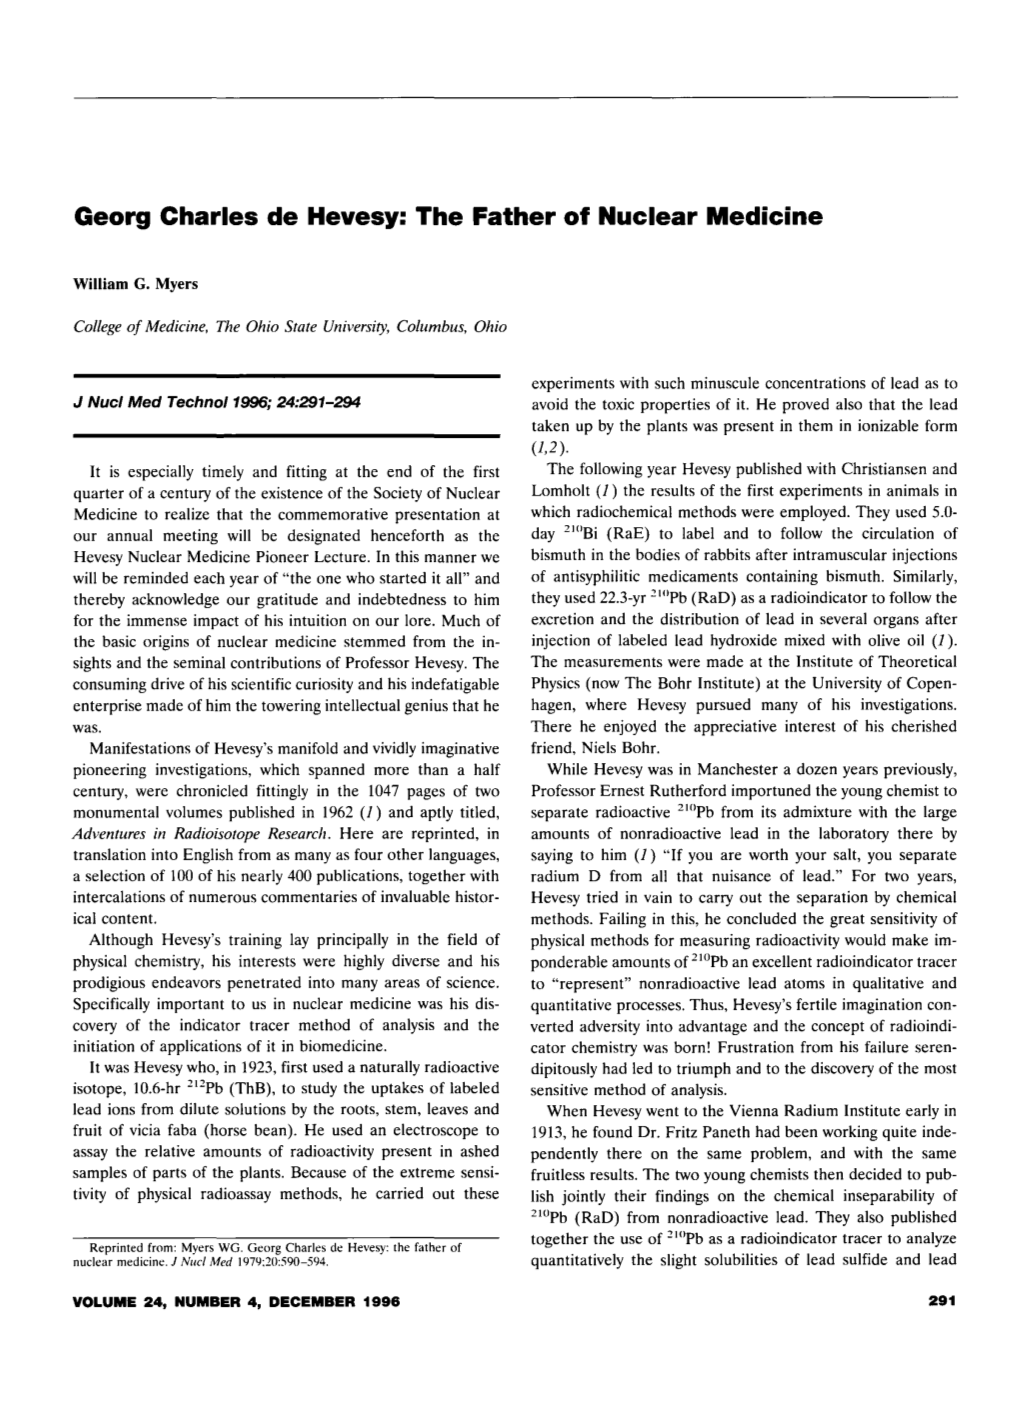 Georg Charles De Hevesy: the Father of Nuclear Medicine